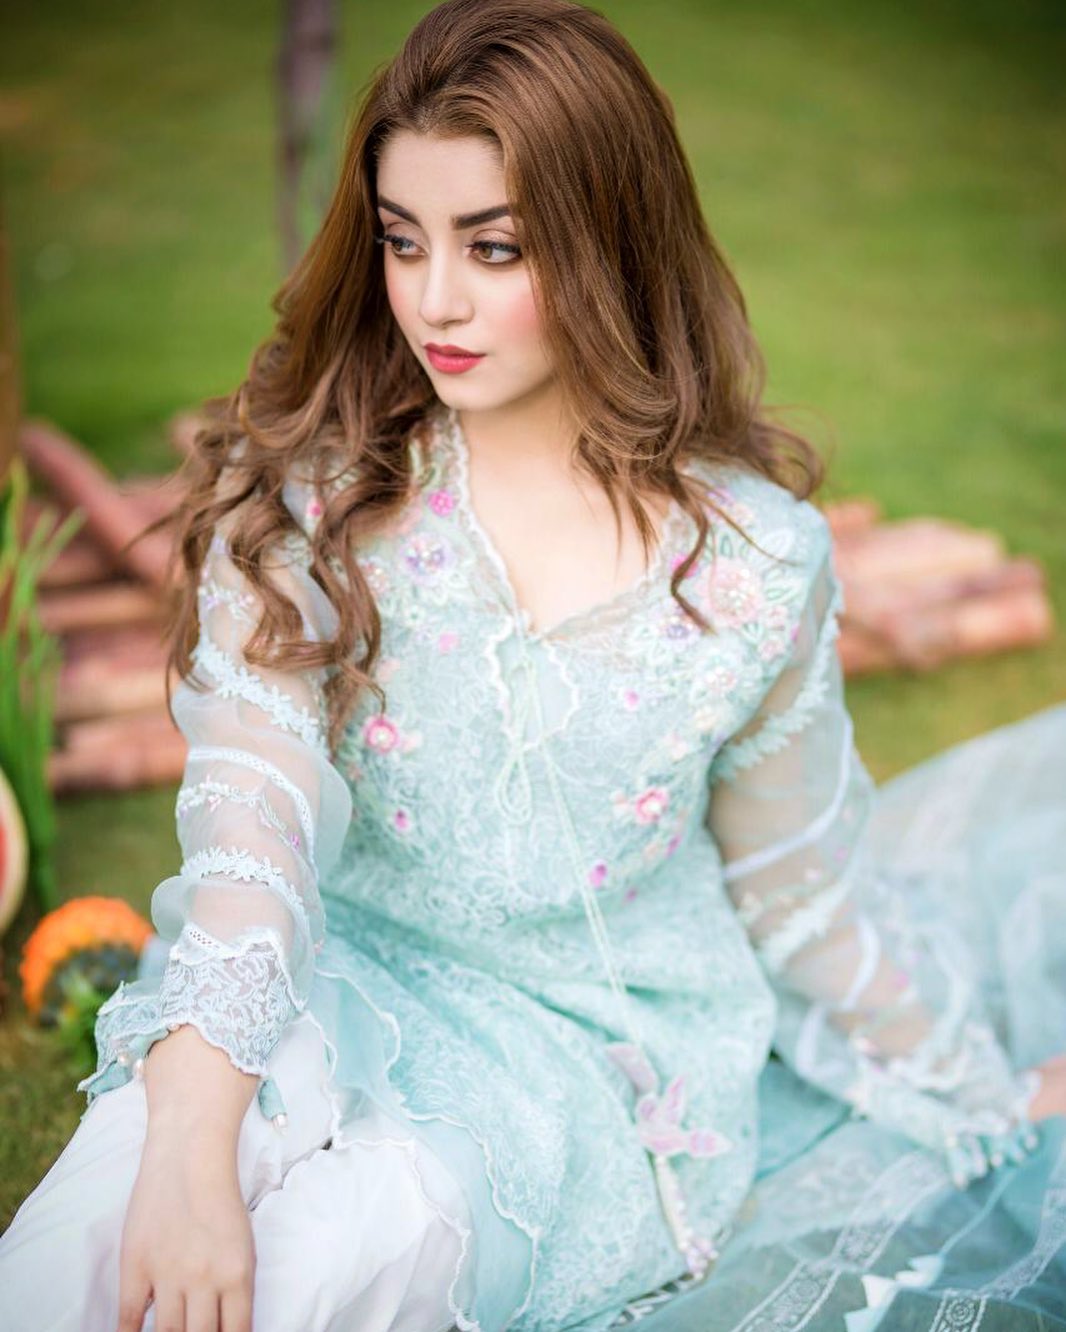 Latest Beautiful Clicks of Gorgeous Actress Alizeh Shah